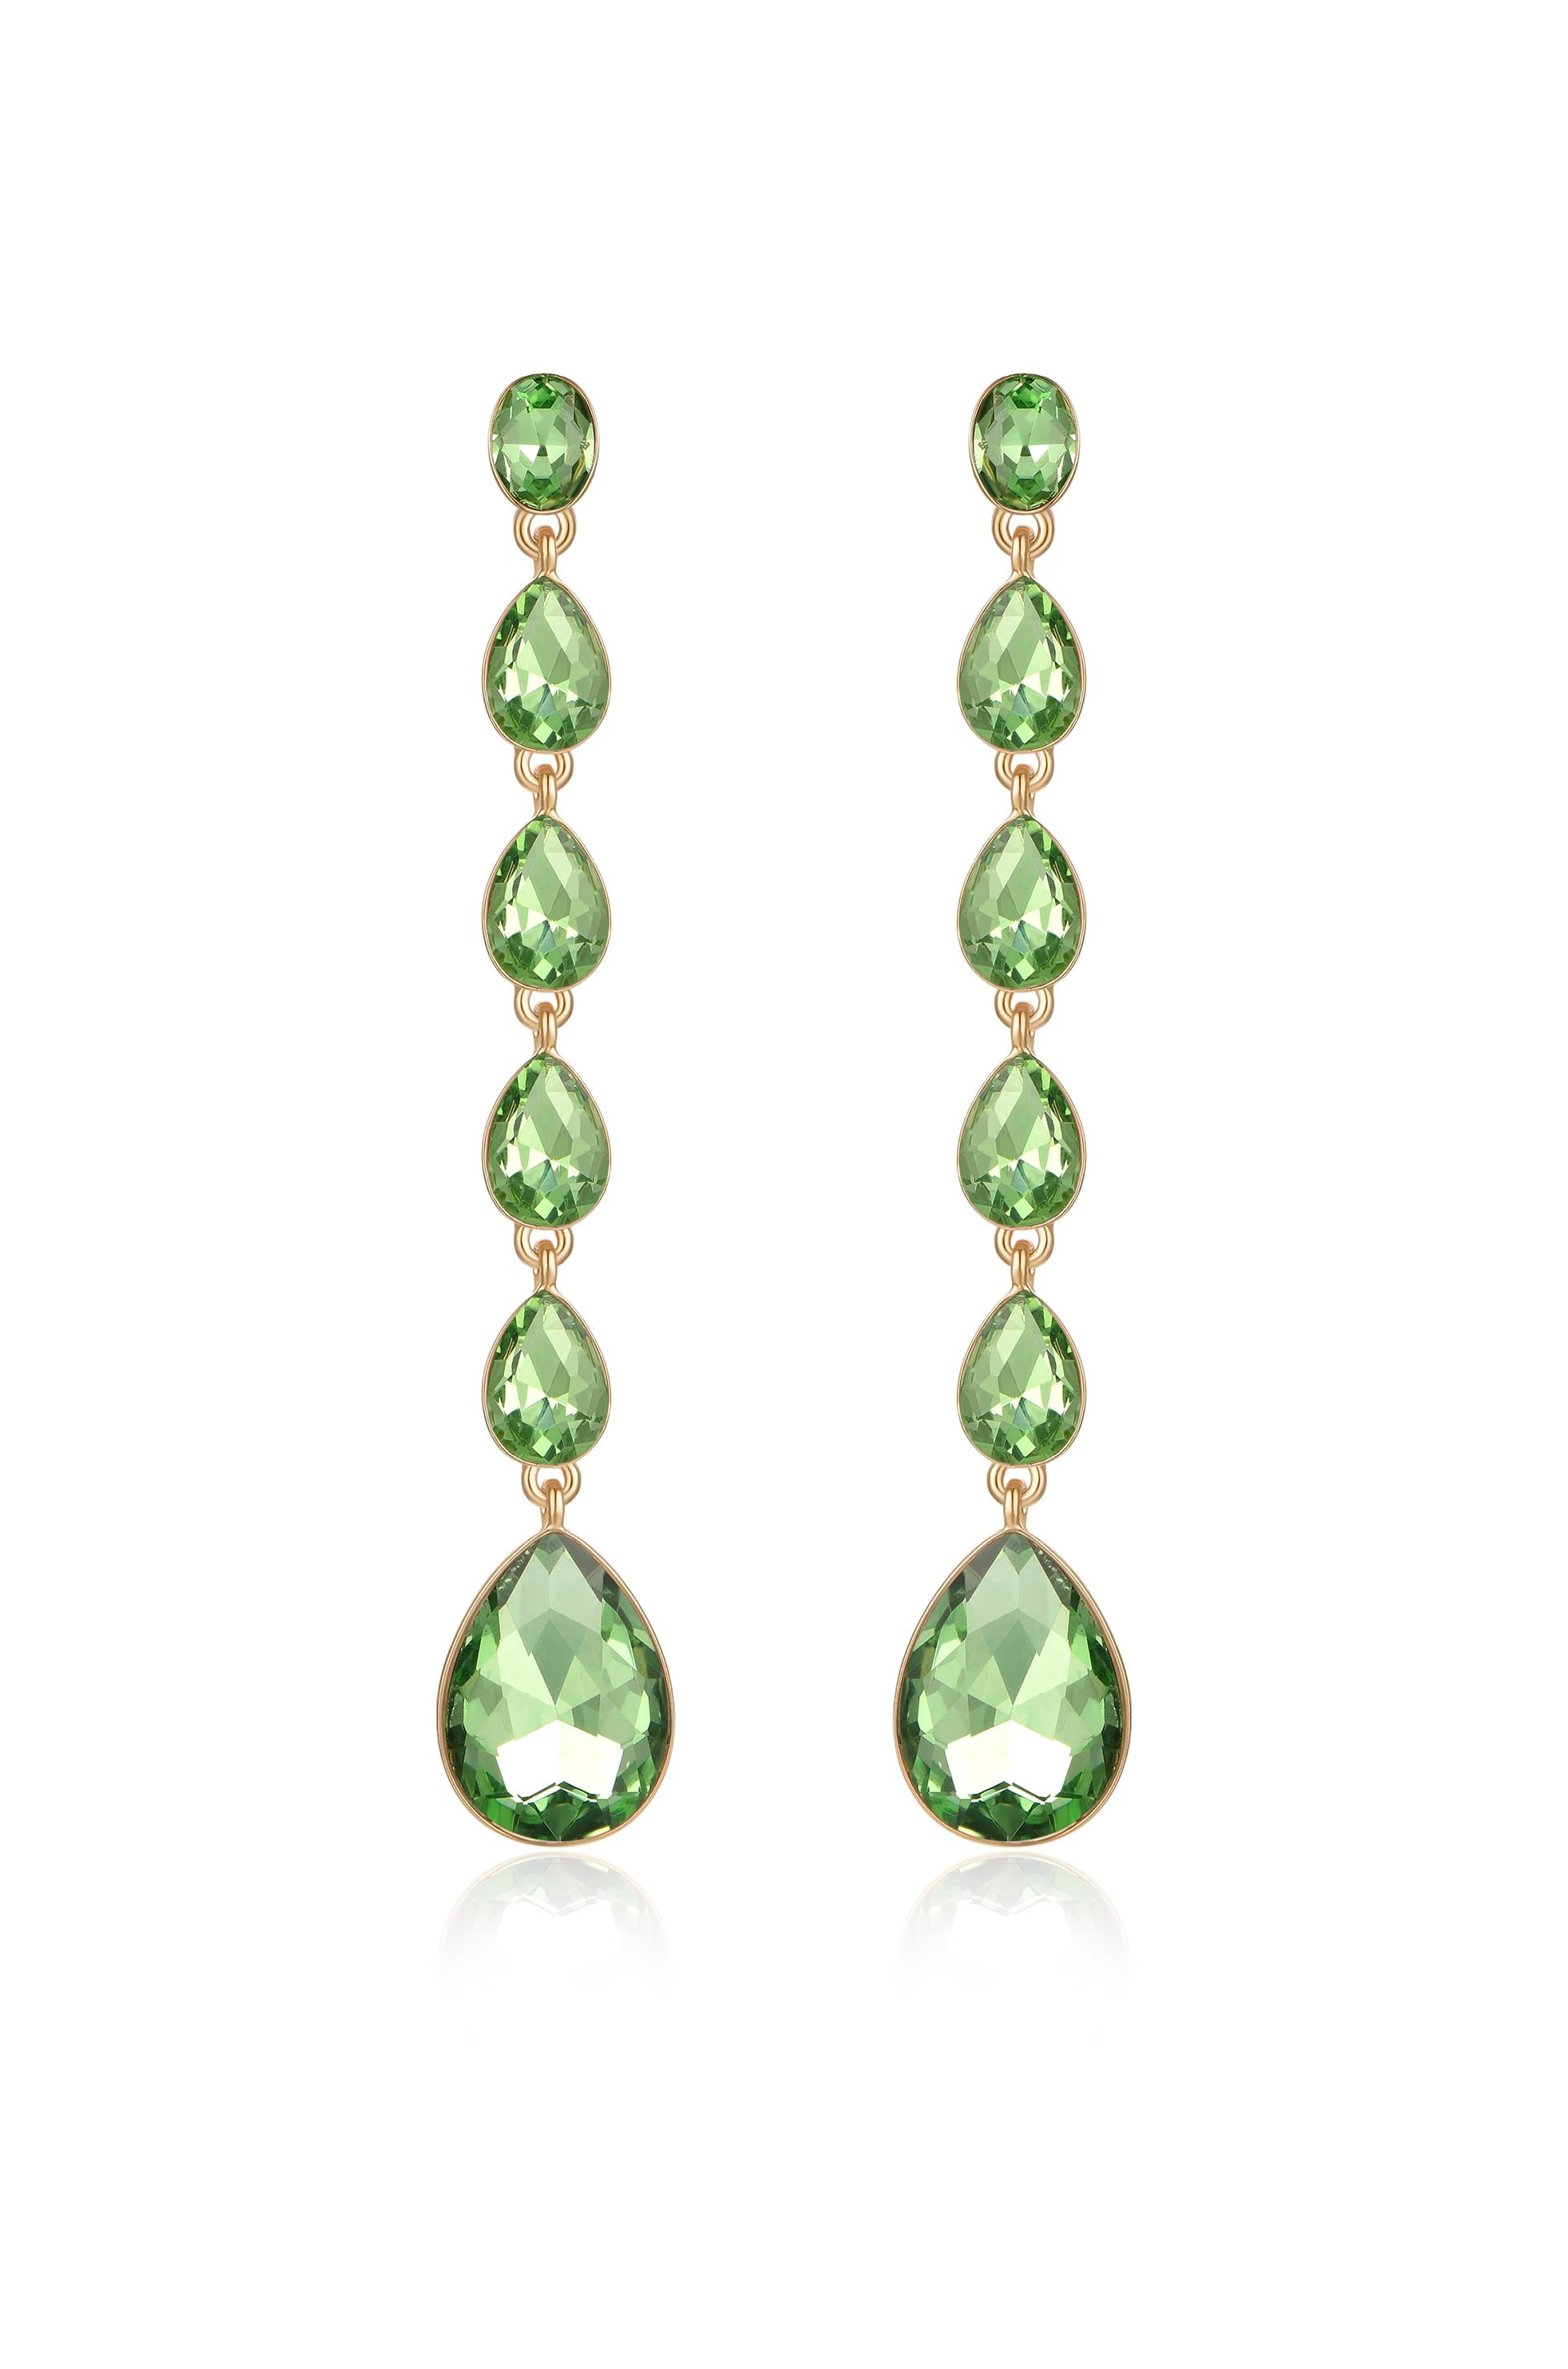 Crystallized Drop 18k Gold Plated Earrings in apple green